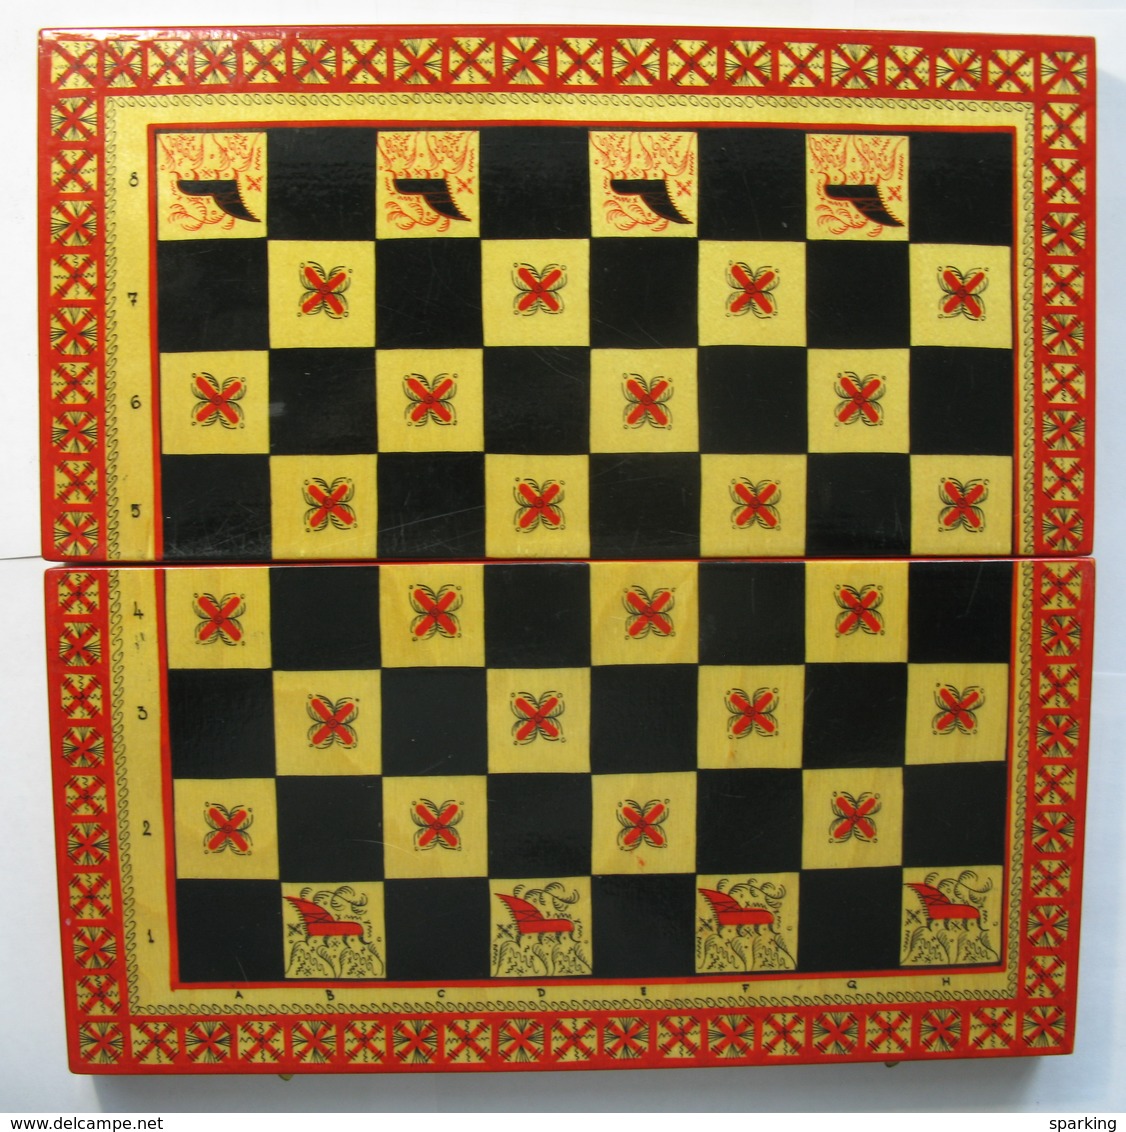 Chess exclusive, wooden carved (set), hand-painted in the style of Mezen painting. 1980-ies, Soviet Union, Russia.